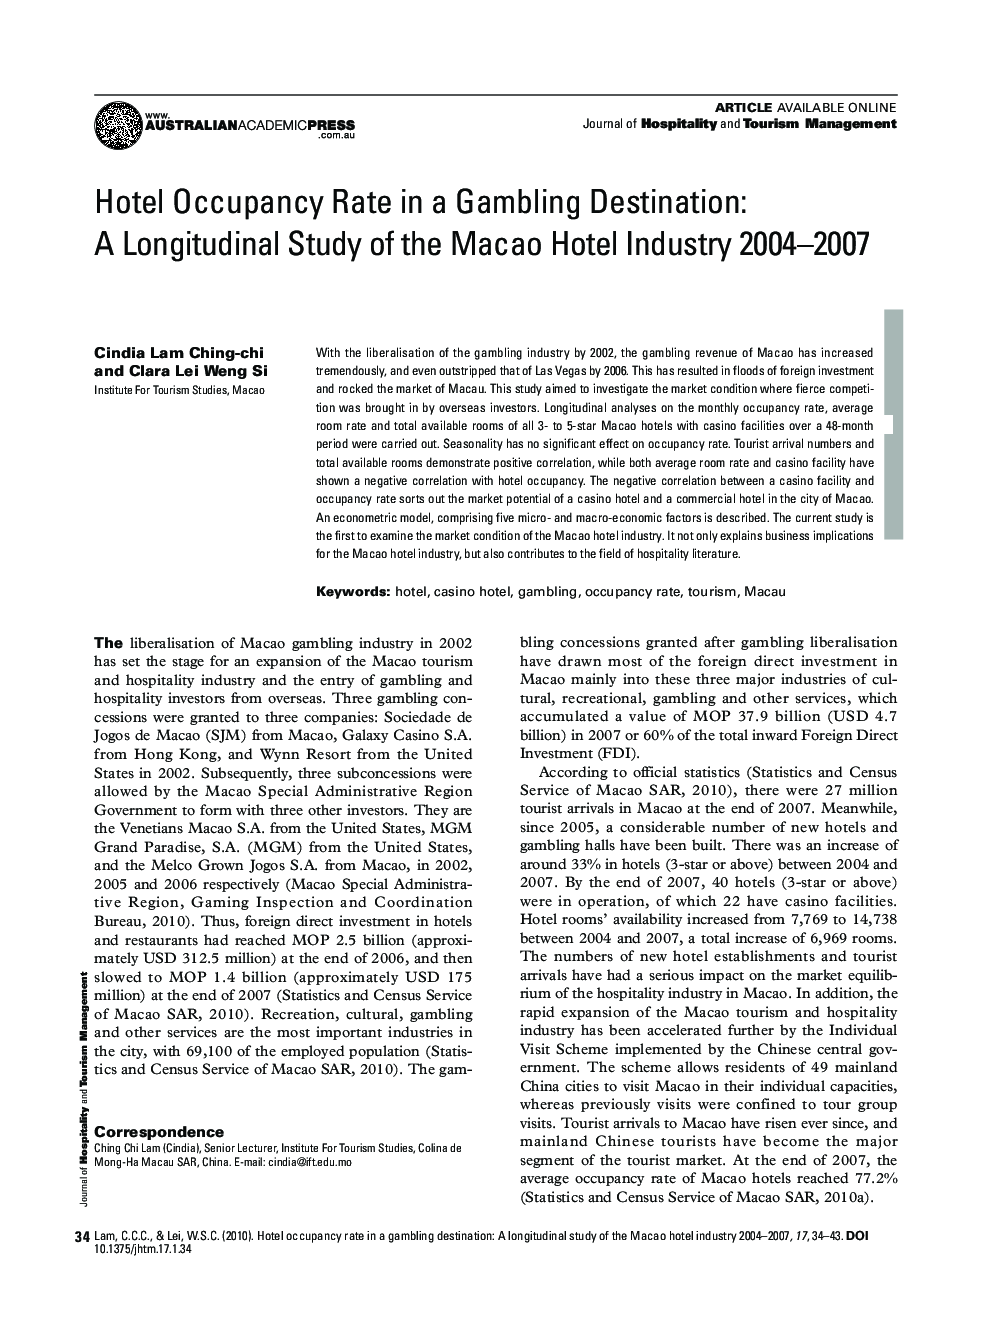 Hotel Occupancy Rate in a Gambling Destination: A Longitudinal Study of the Macao Hotel Industry 2004–2007